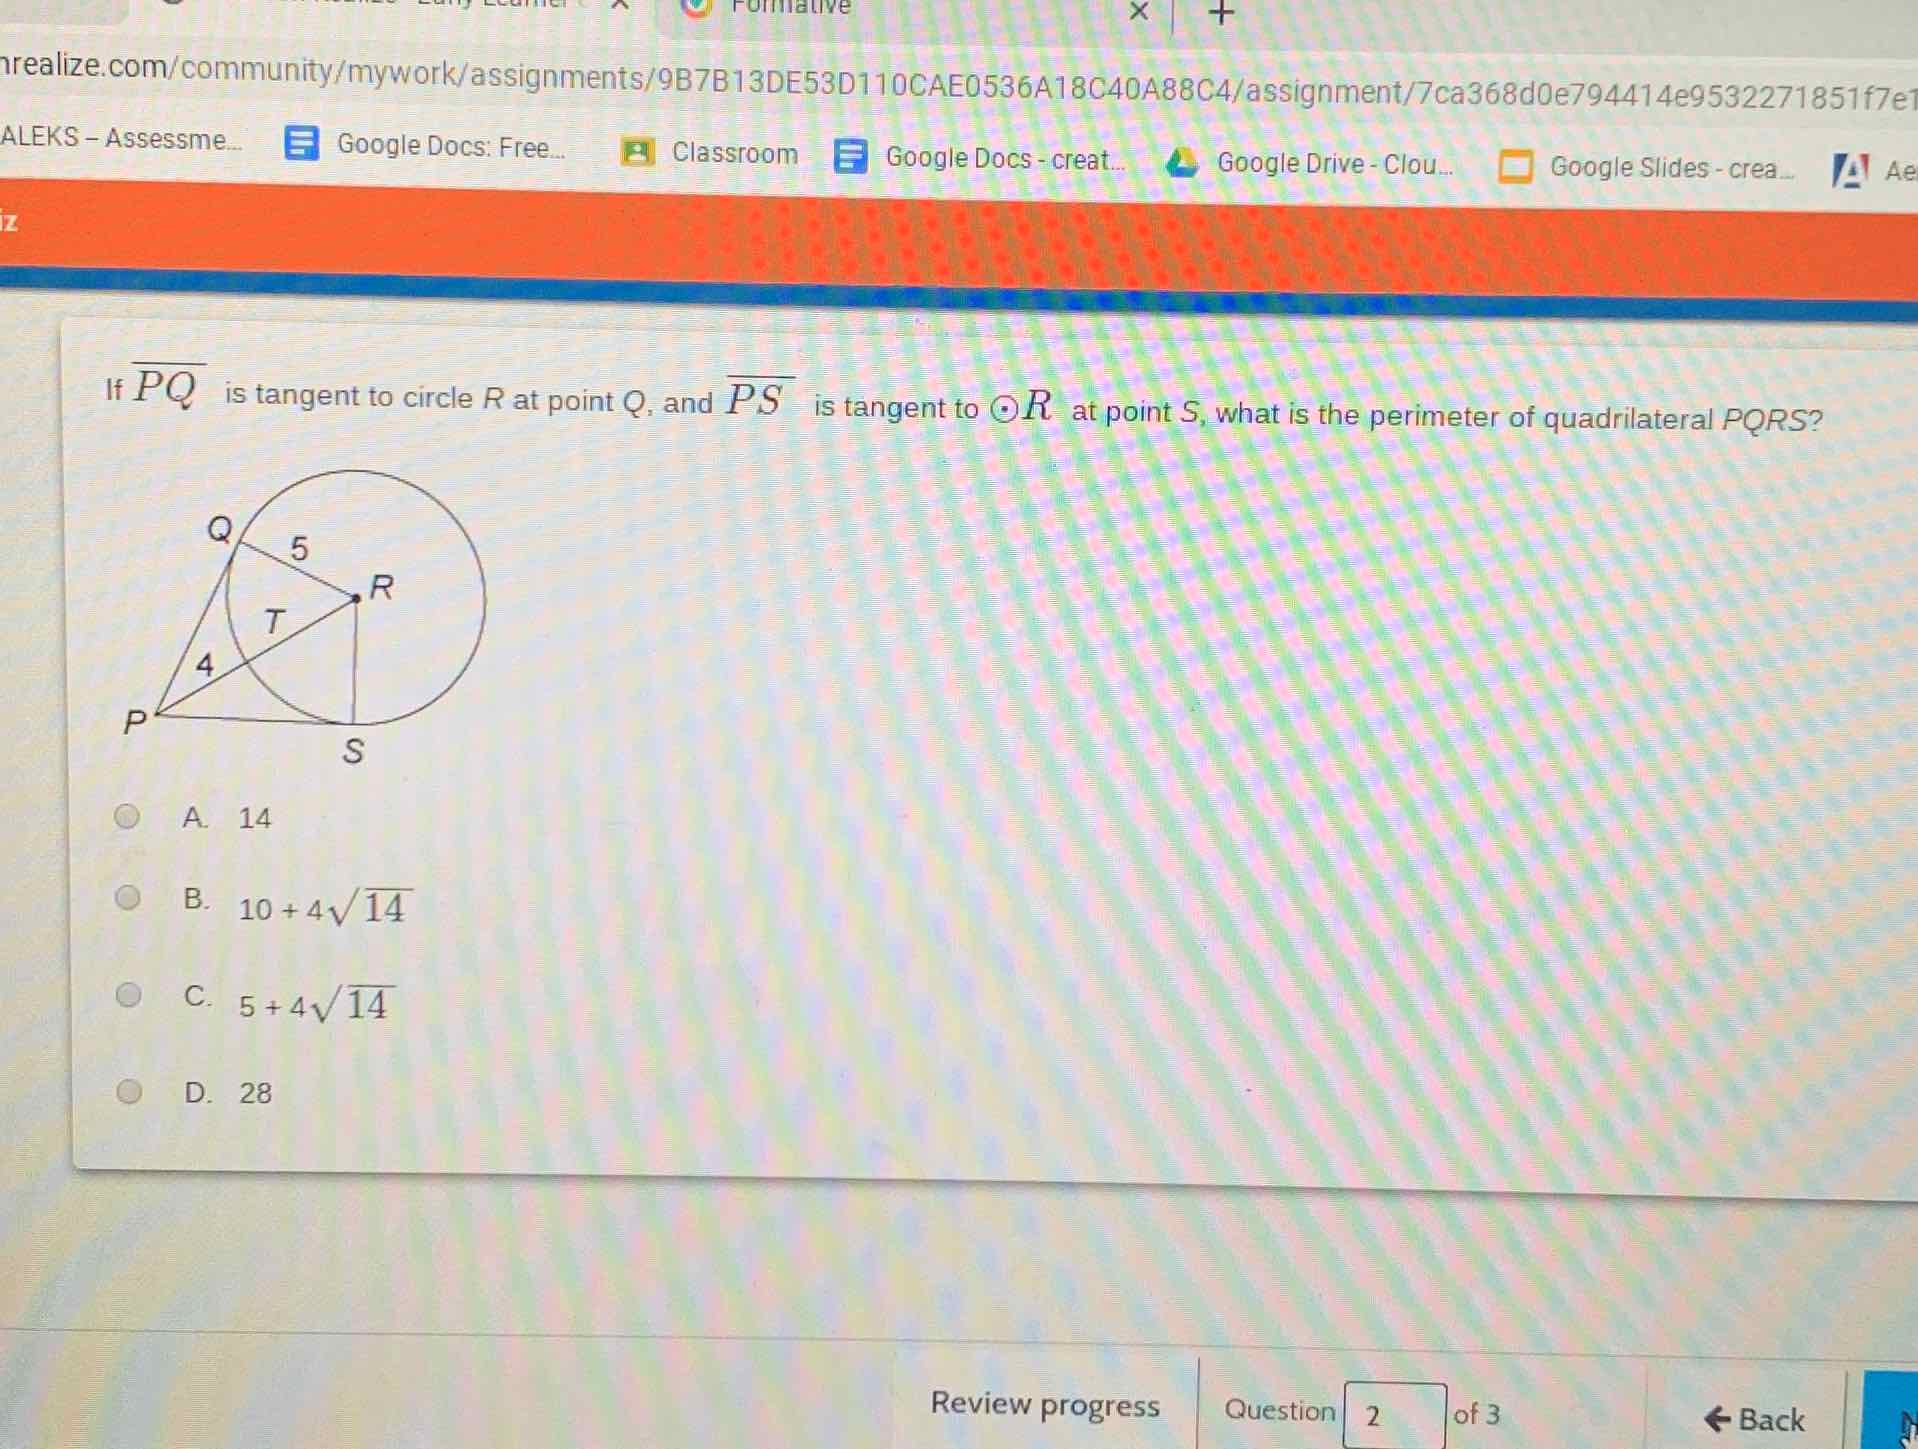 If \( \overline{P Q} \) is tangent to circle \( R \) at point \( Q \), and \( \overline{P S} \) is tangent to \( \odot R \) at point \( S \), what is the perimeter of quadrilateral \( P Q R S \) ?
A. 14
B. \( 10+4 \sqrt{14} \)
C. \( 5+4 \sqrt{14} \)
D. 28